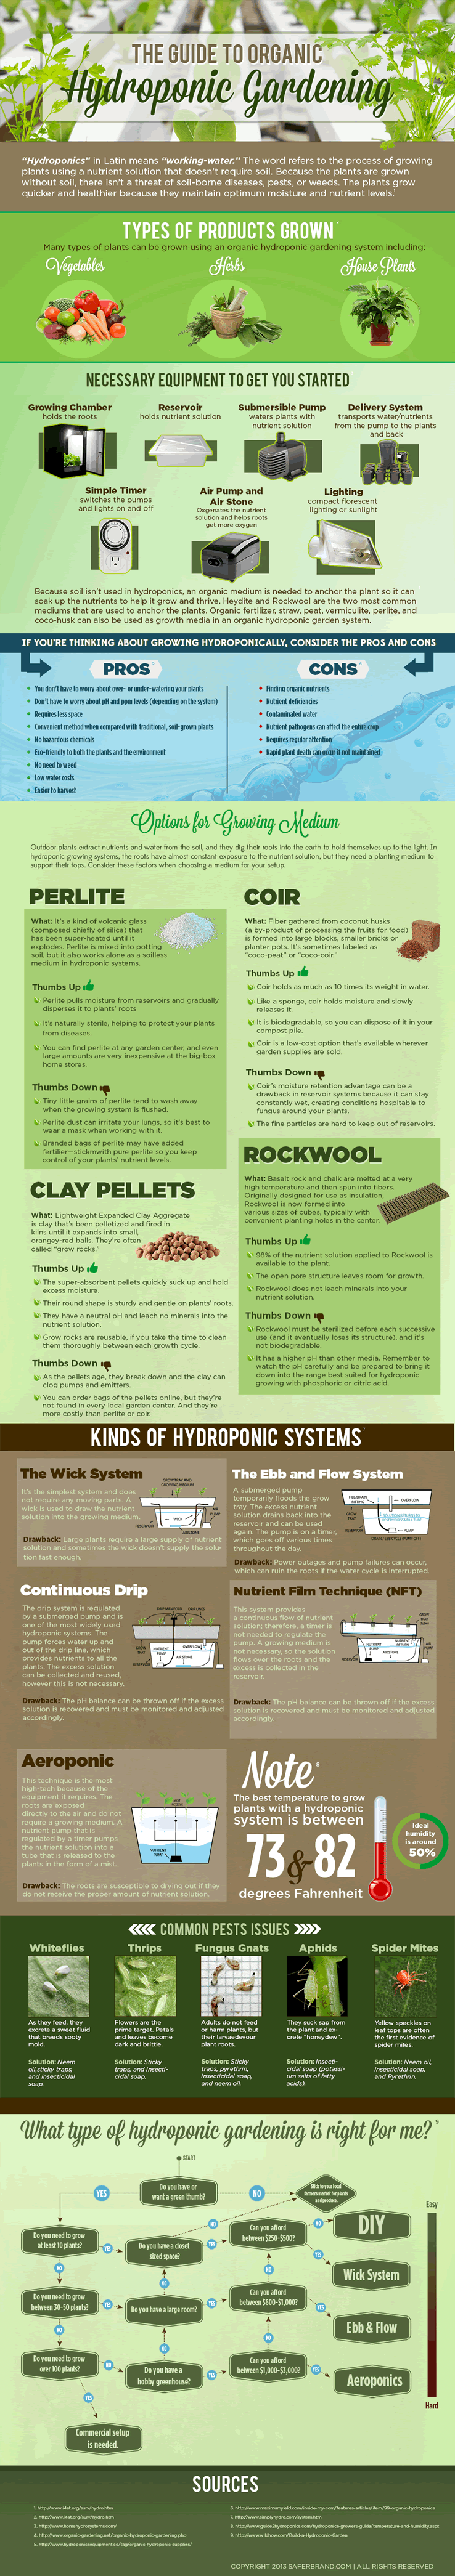 Guide to Hydroponic Gardening Infographic